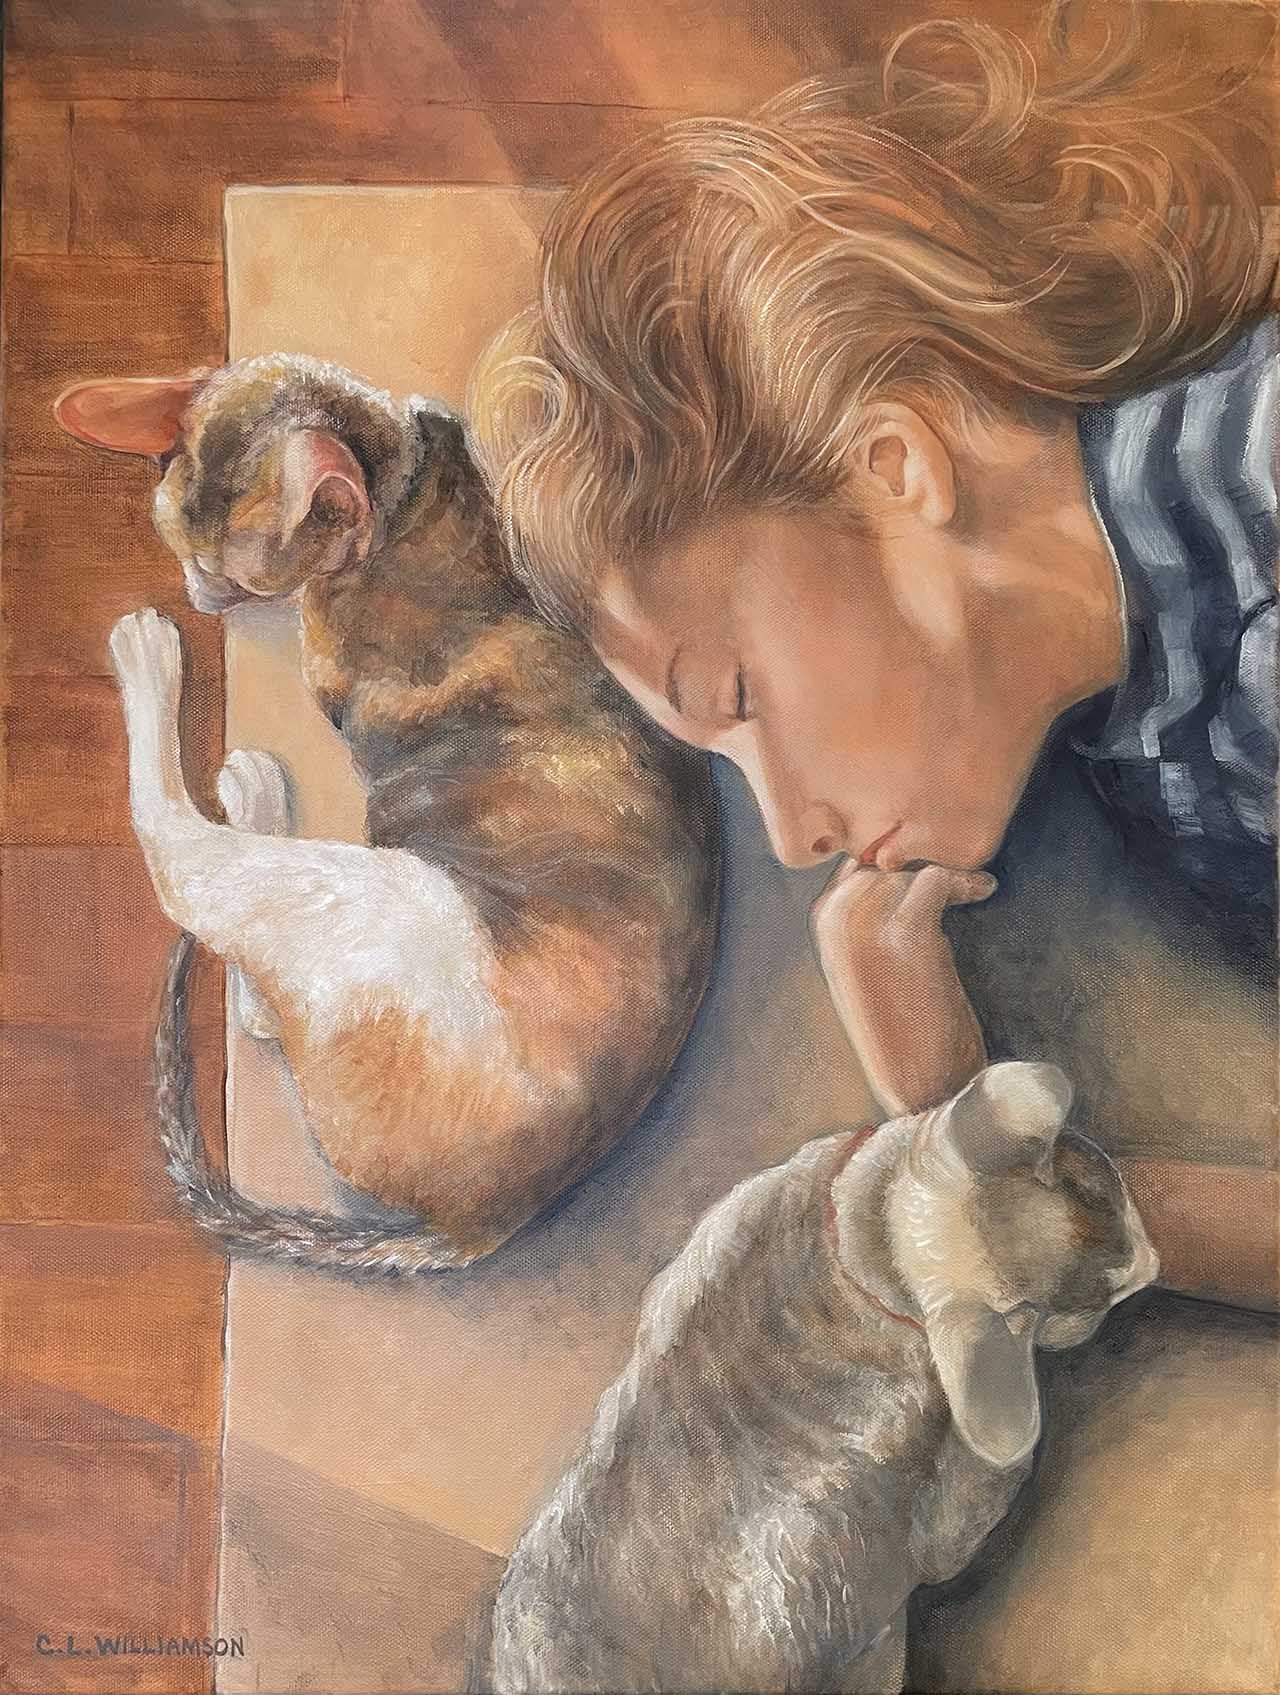 Oil painting of a girl on the floor with her two cats.. Painted by Carol Williamson.